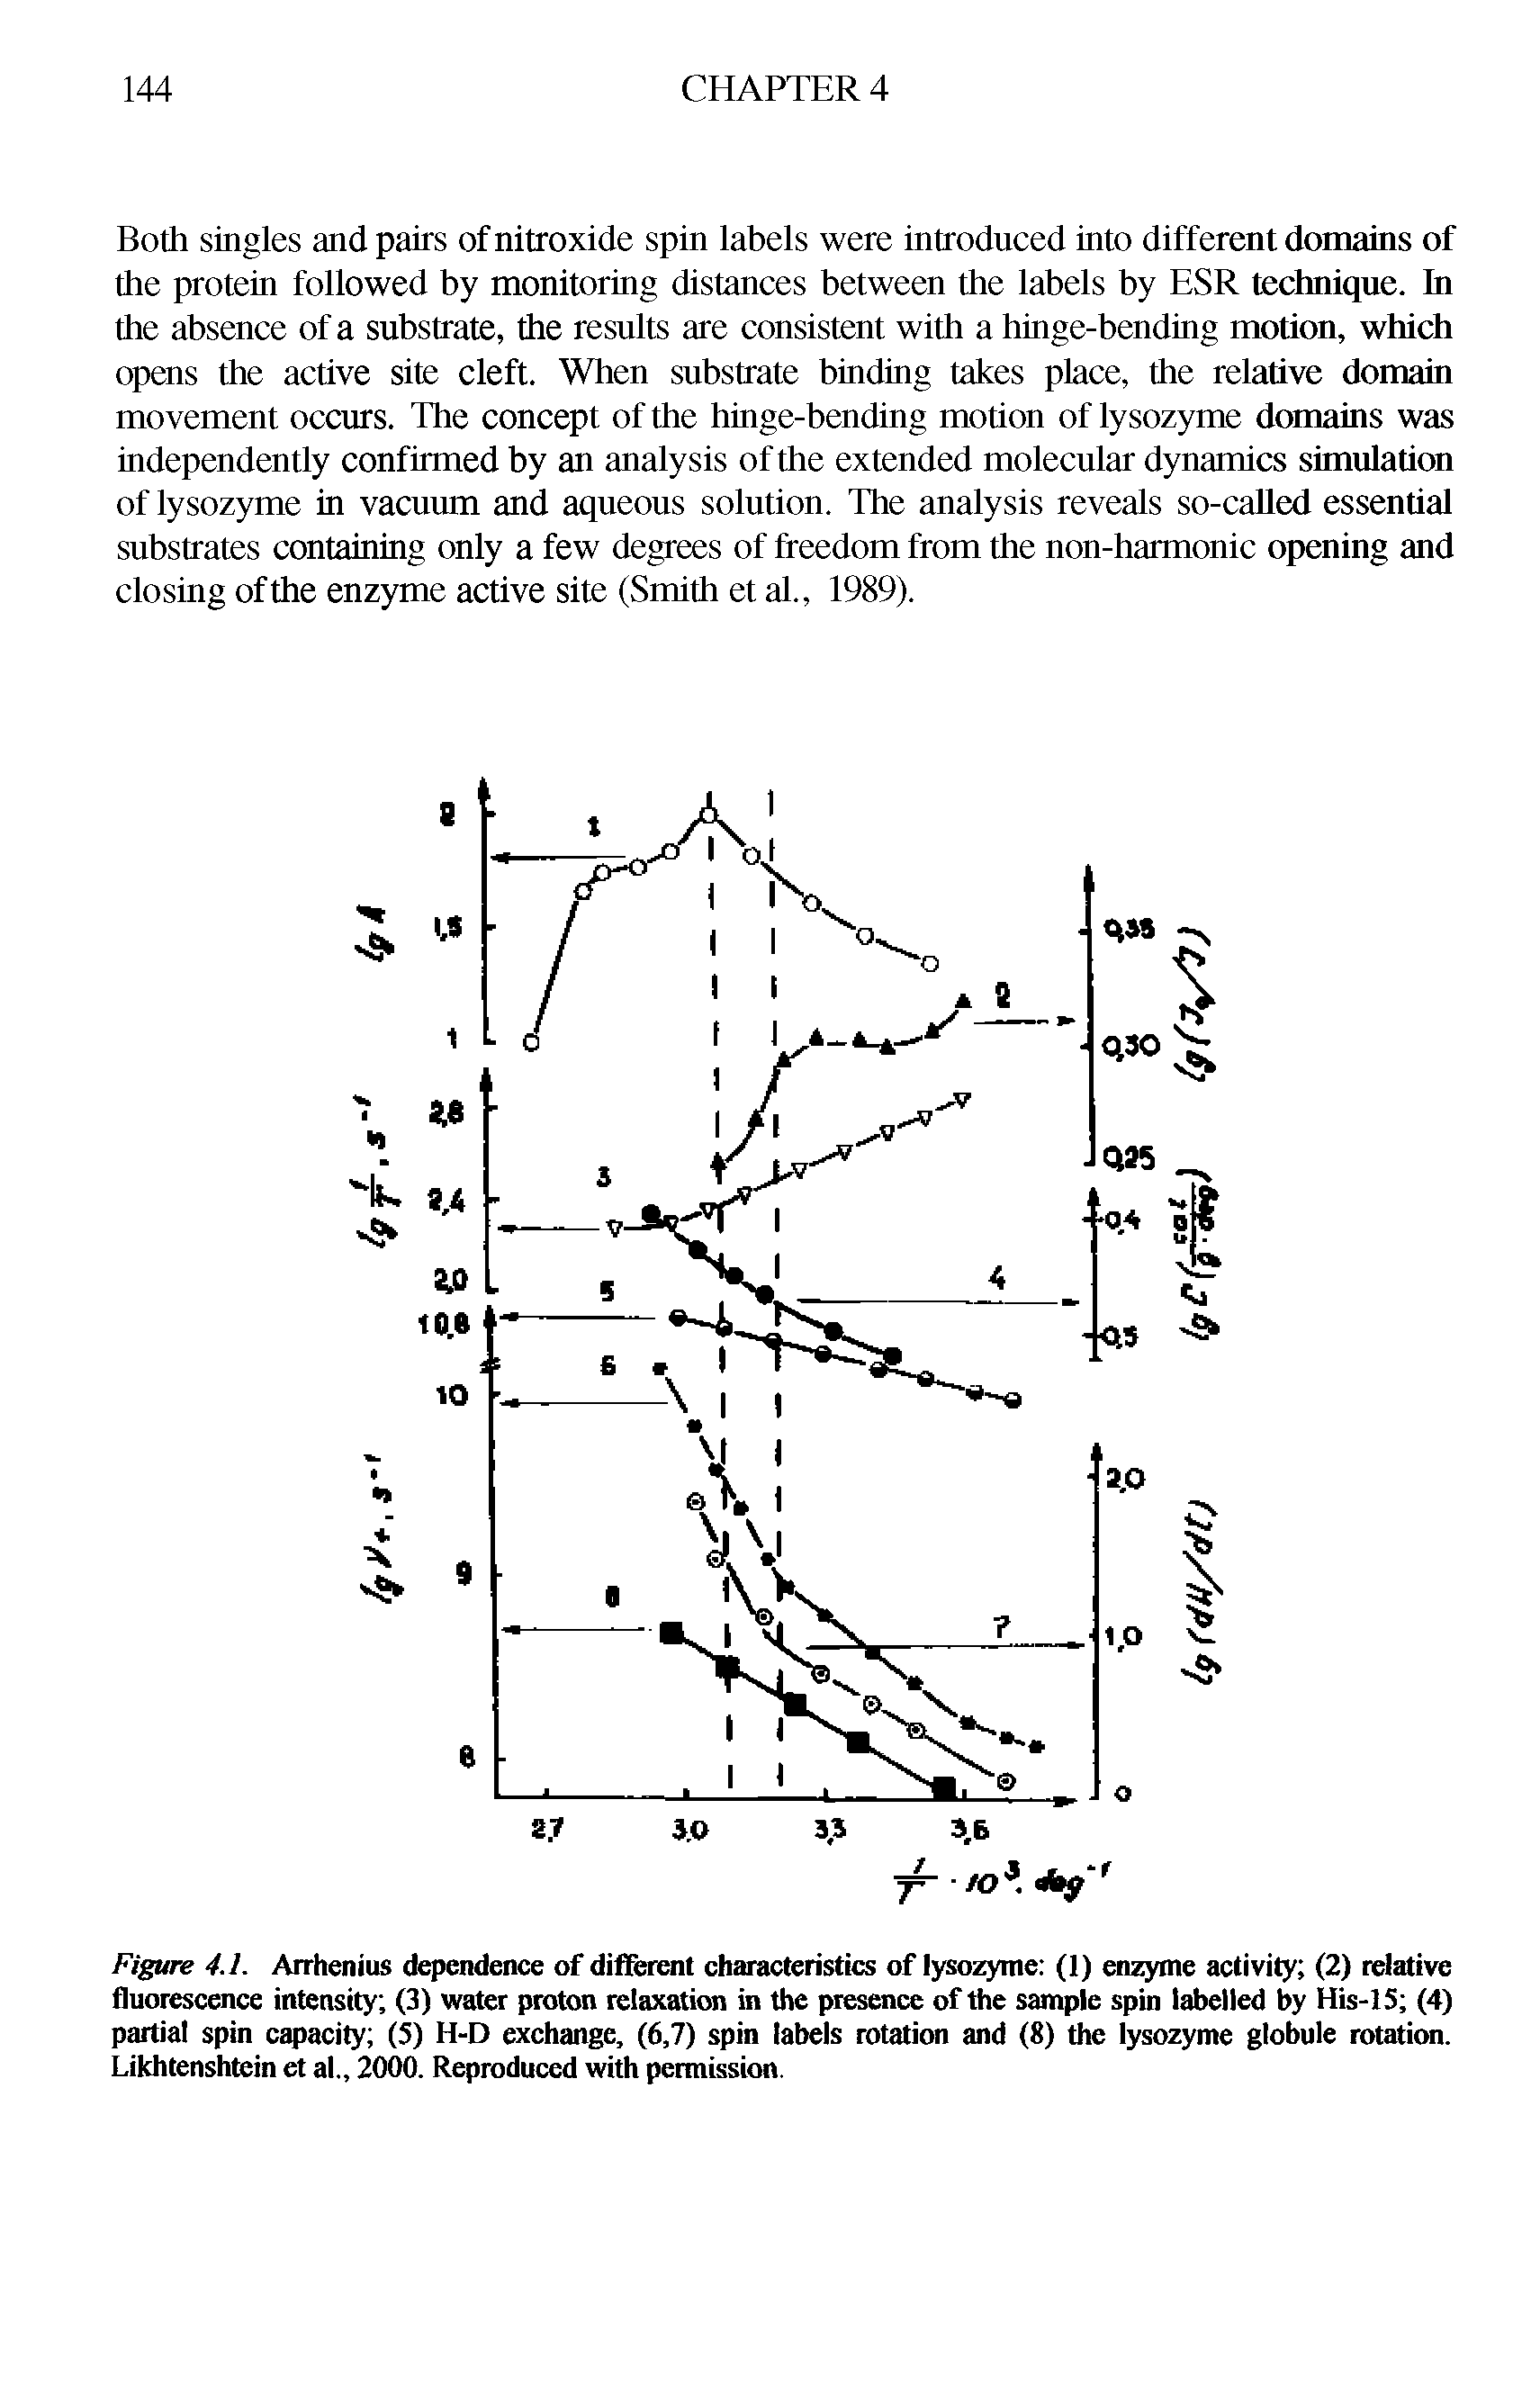 Figure 4.1. Arrhenius dependence of different characteristics of lysozyme (1) enzyme activity (2) relative fluorescence intensity (3) water proton relaxation in the presence of the sample spin labelled by His-lS (4) partial spin capacity (5) H-D exchange, (6,7) spin labels rotation and (8) the lysozyme globule rotation. Likhtenshtein et al., 2000. Reproduced with permission.